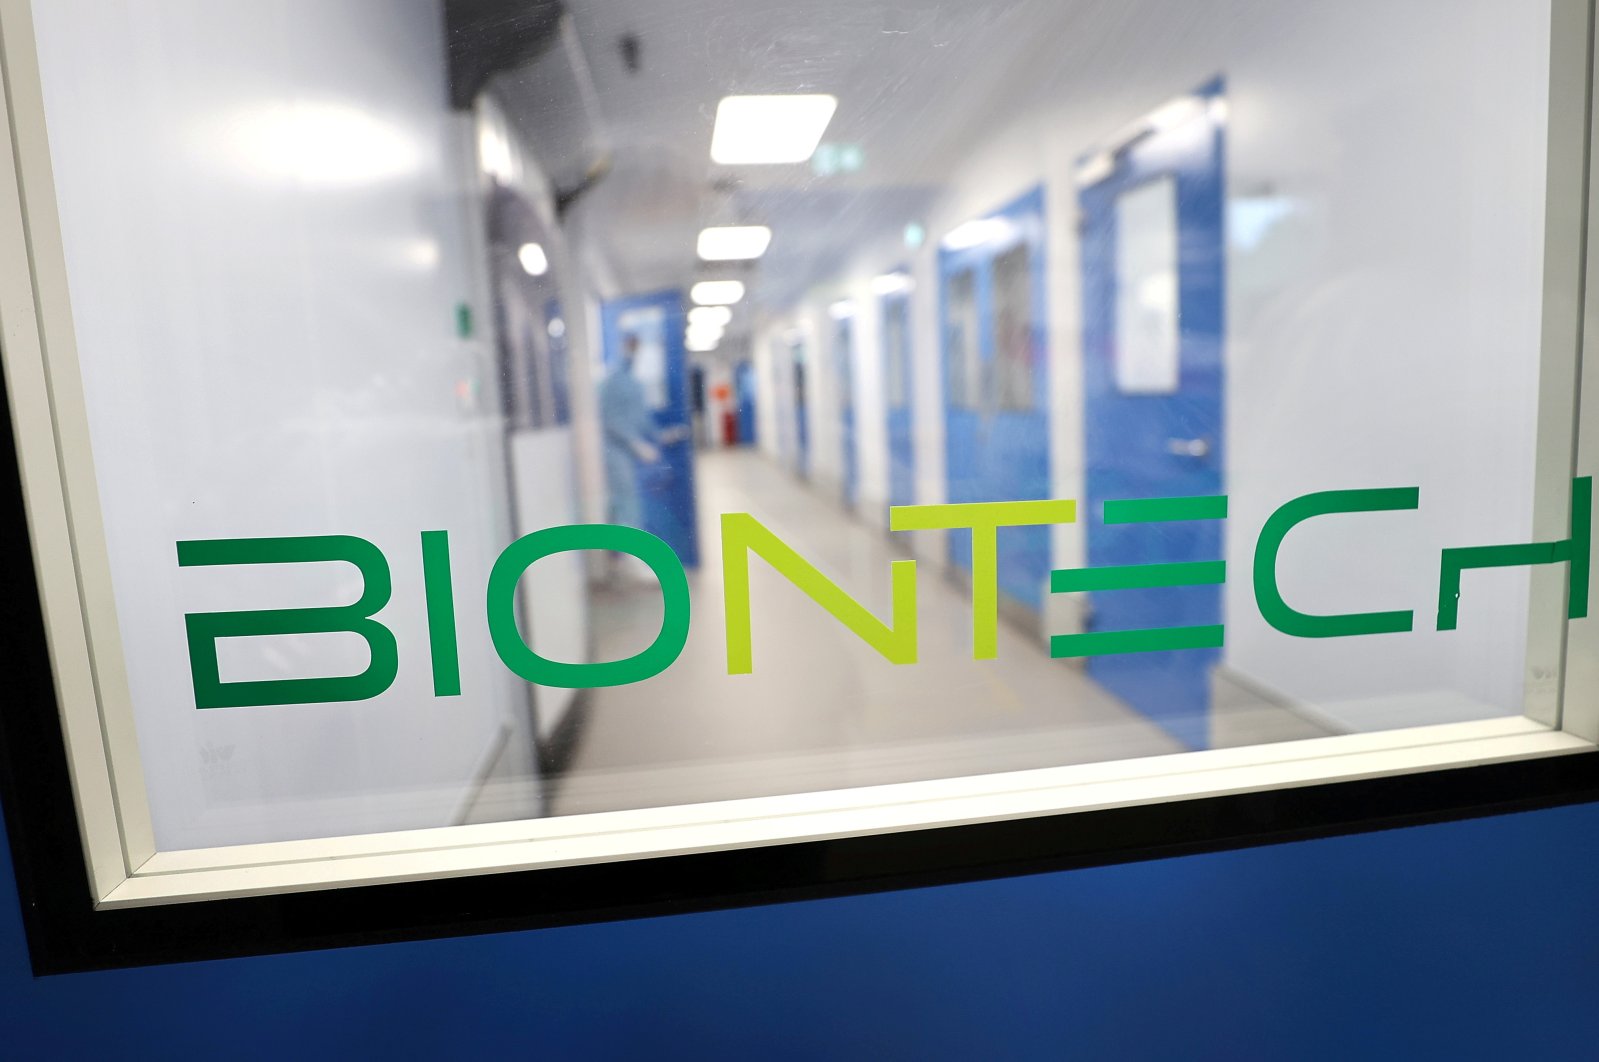 The laboratories of BioNTech at their COVID-19 vaccine production facility, in Marburg, Germany, March 27, 2021. (Reuters)